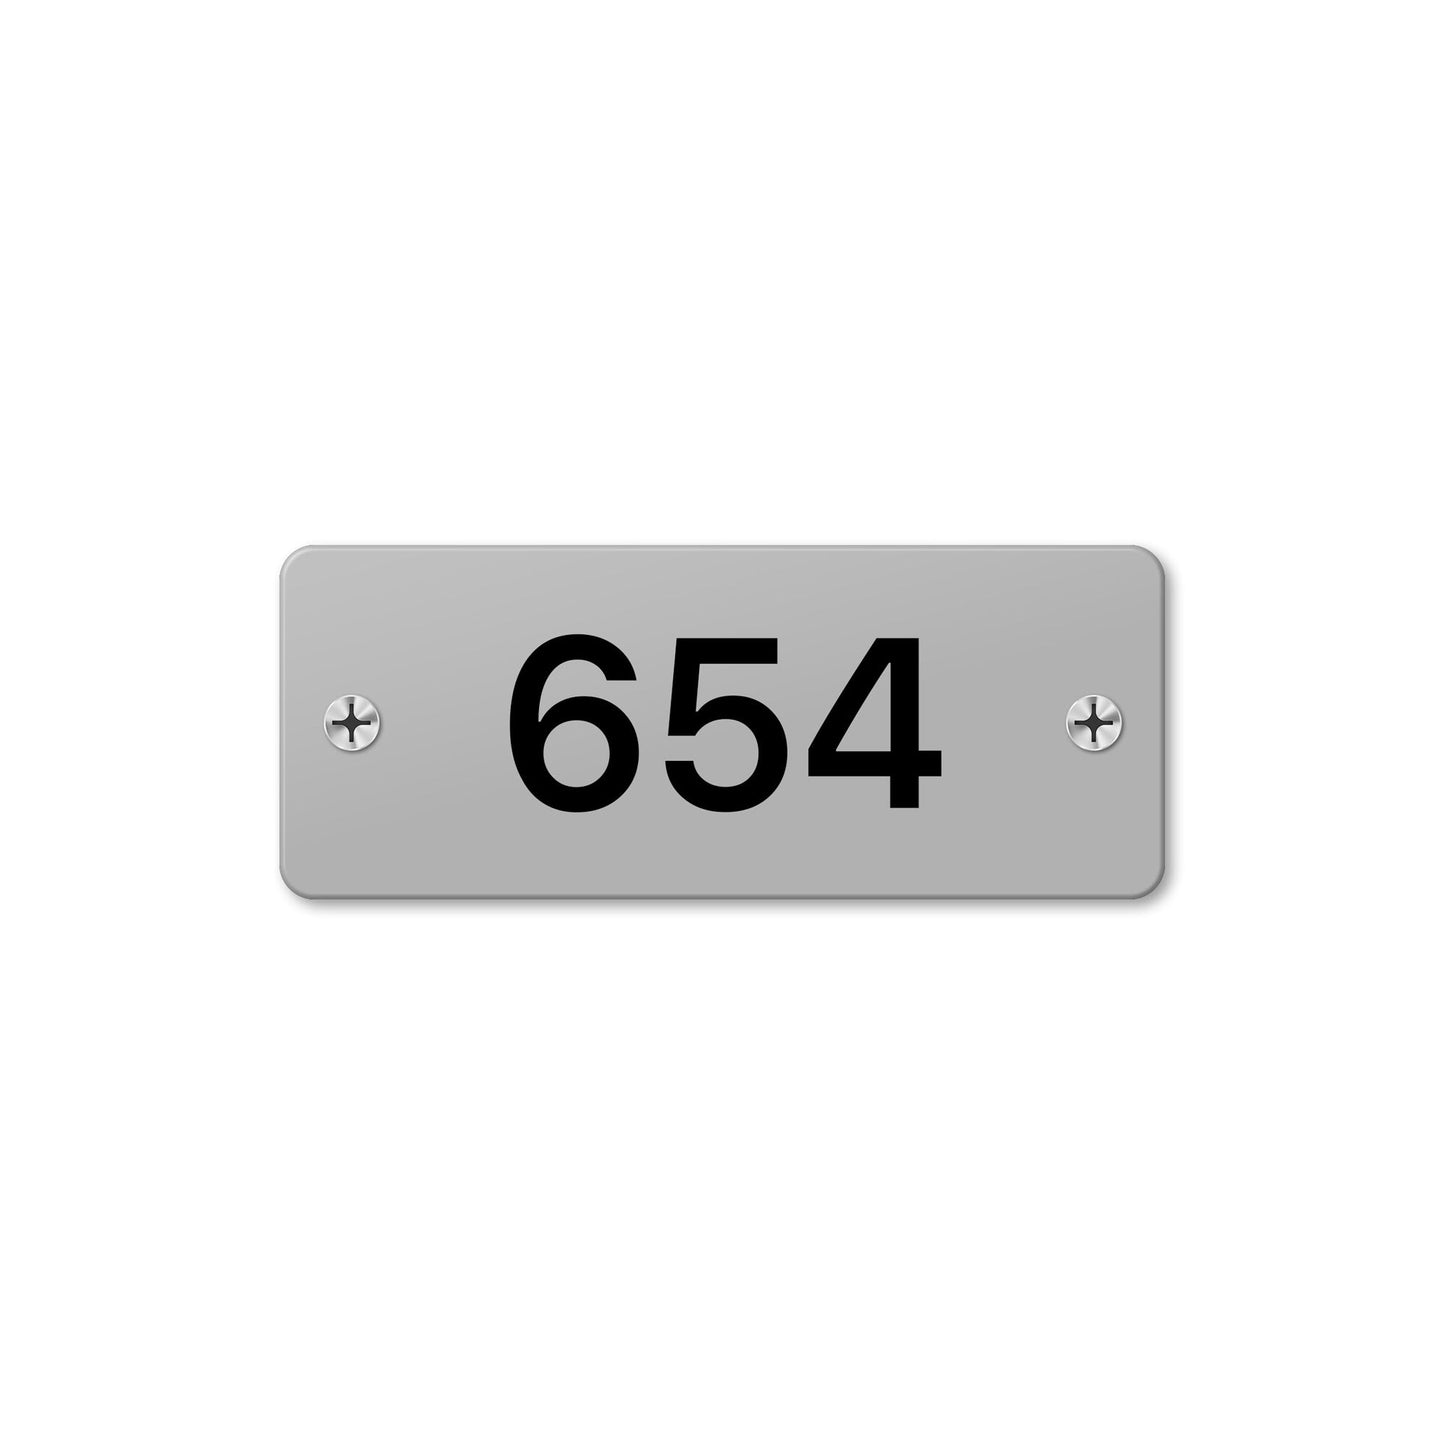 Numeral 654